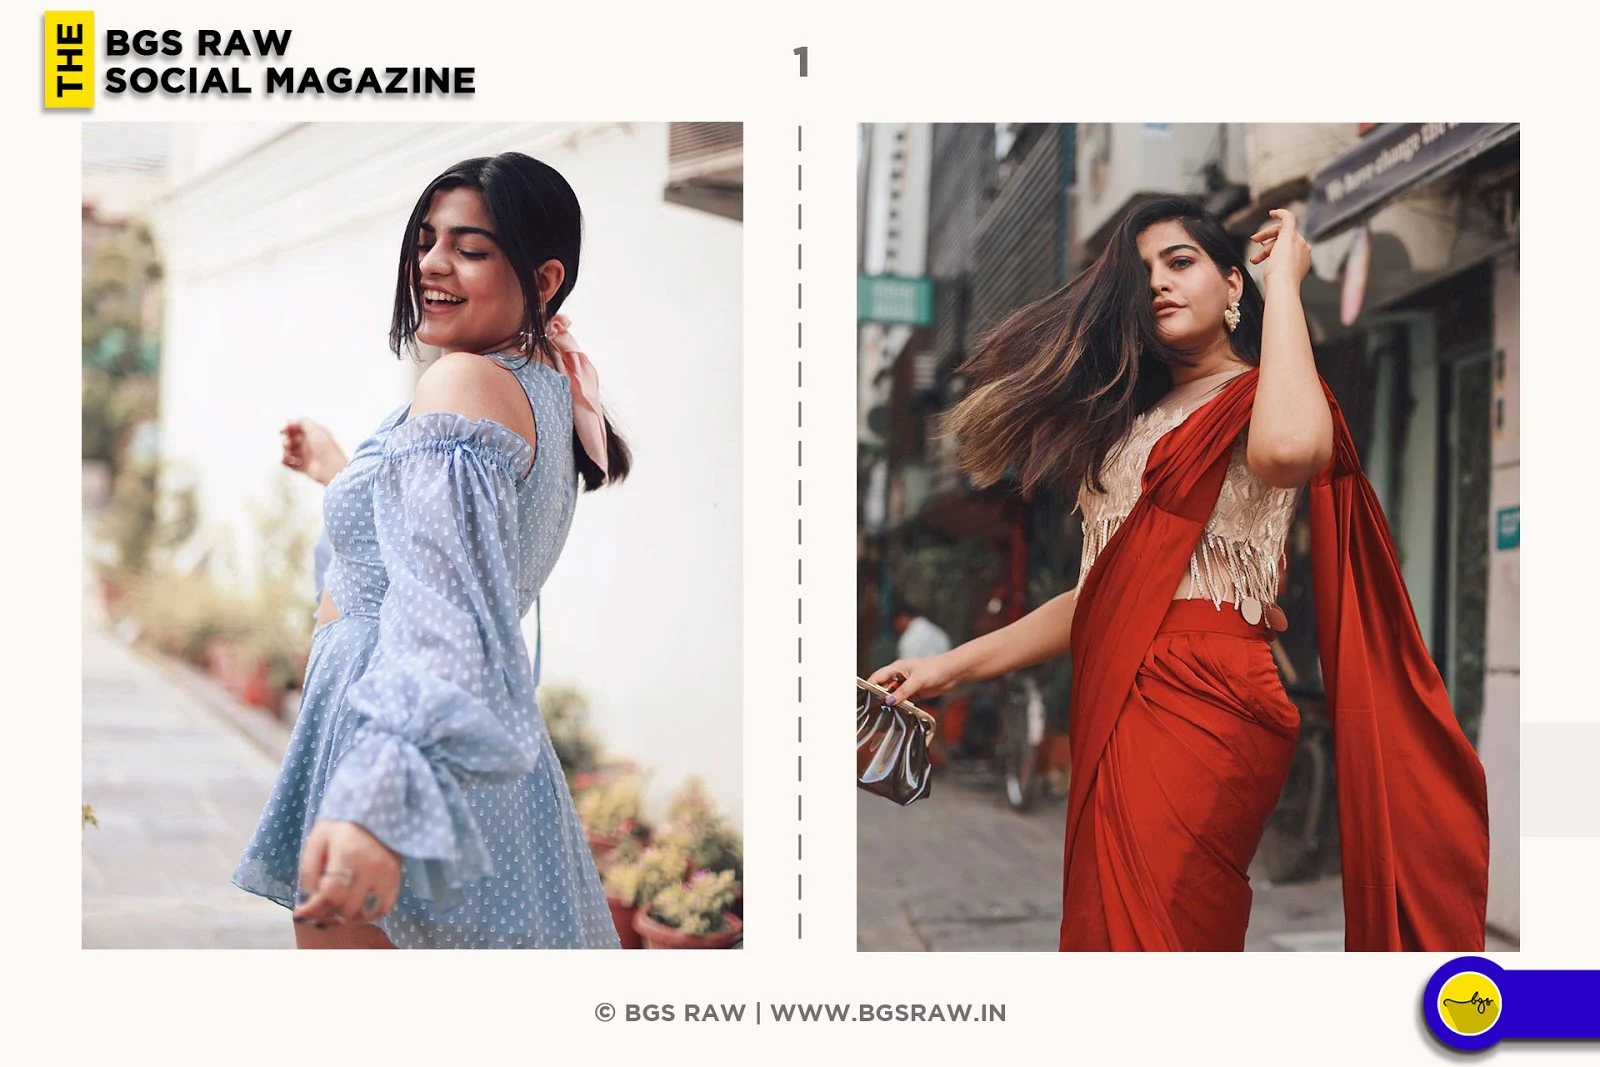 Kritika Khurana is in top 10 fashion youtuber of 2019 as The Bgs Raw Social Magazine have publish there article.